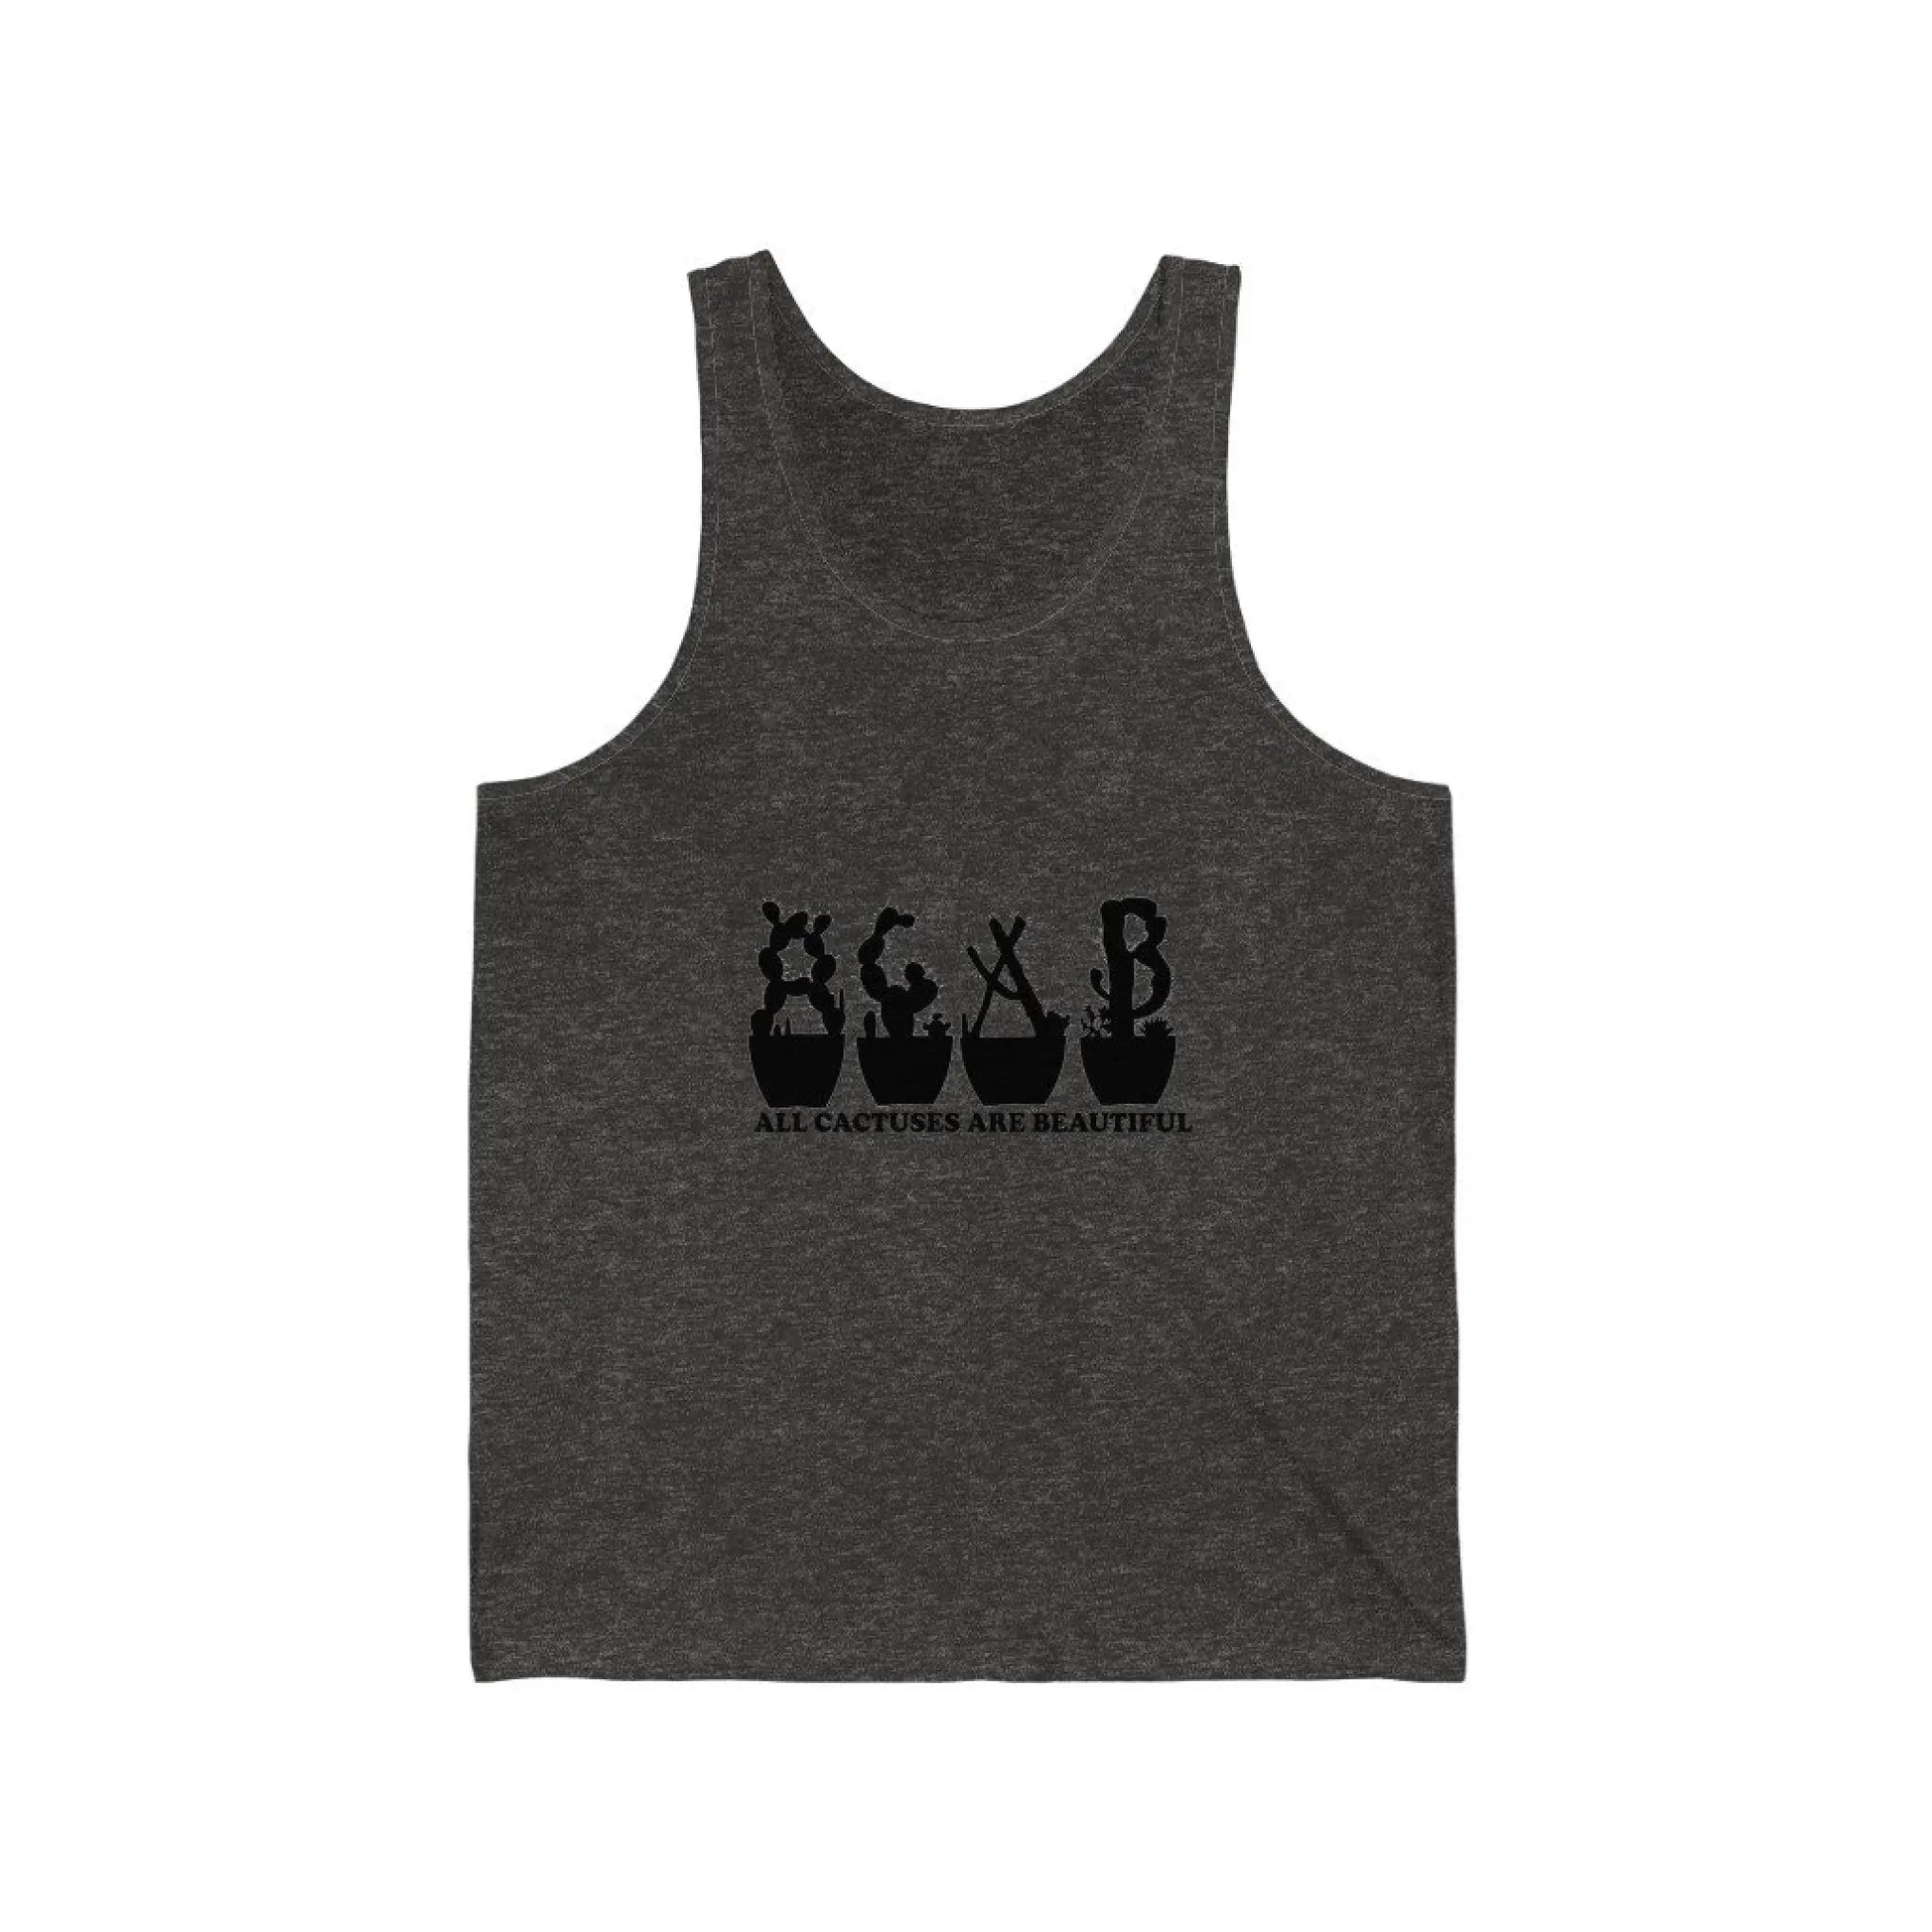 Unisex Jersey Tank - All Cactuses Are Beautiful - Charcoal